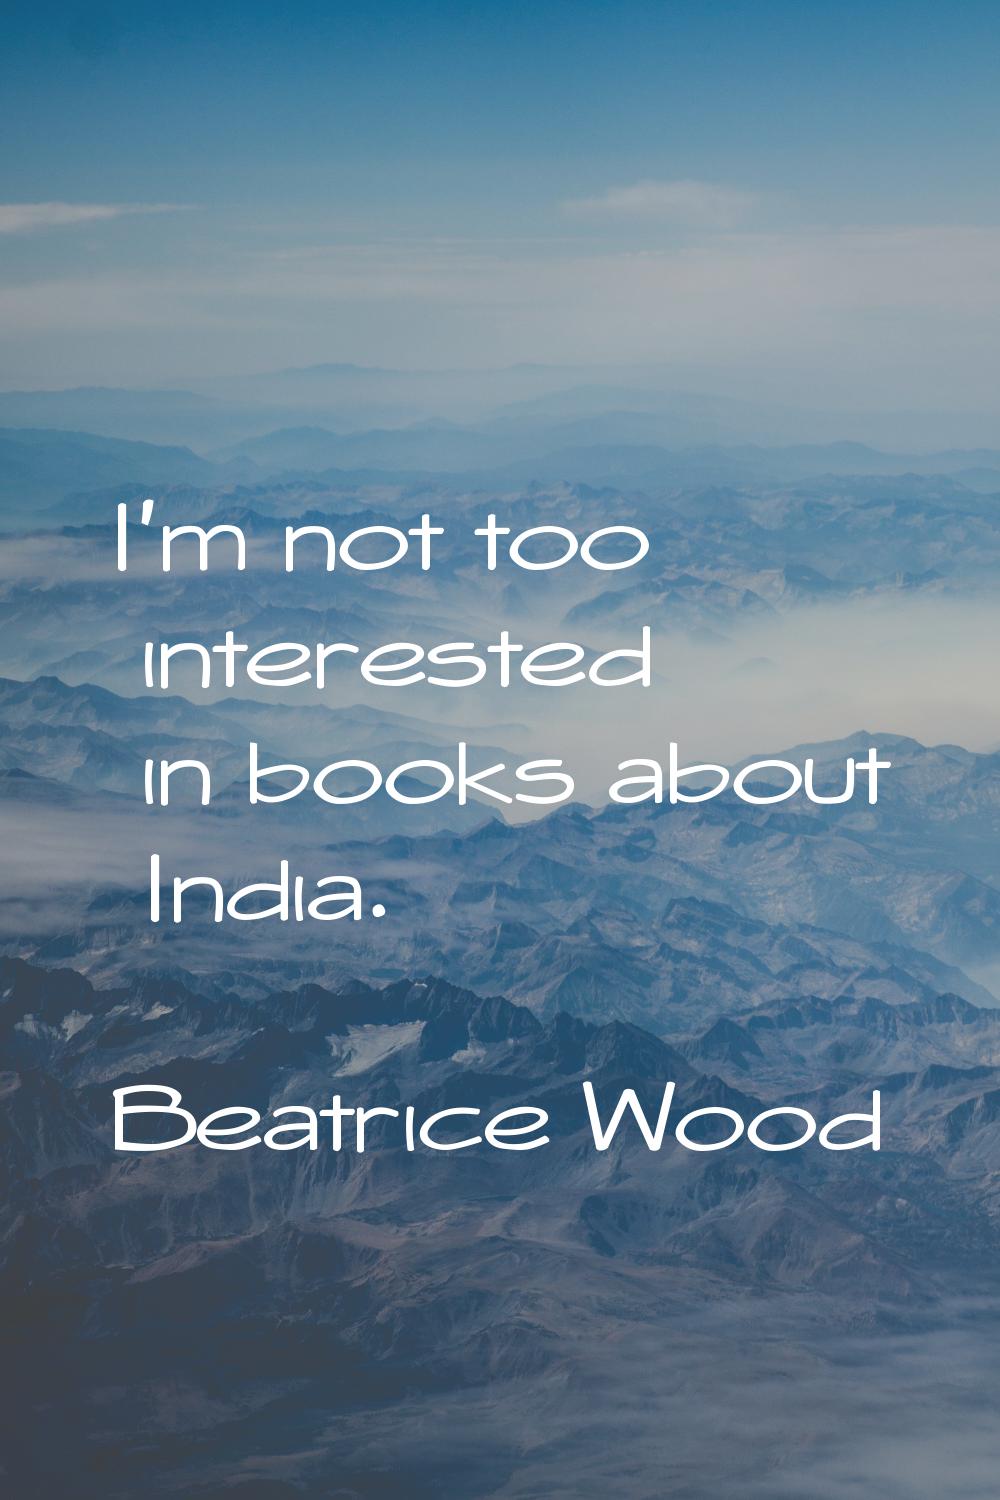 I'm not too interested in books about India.